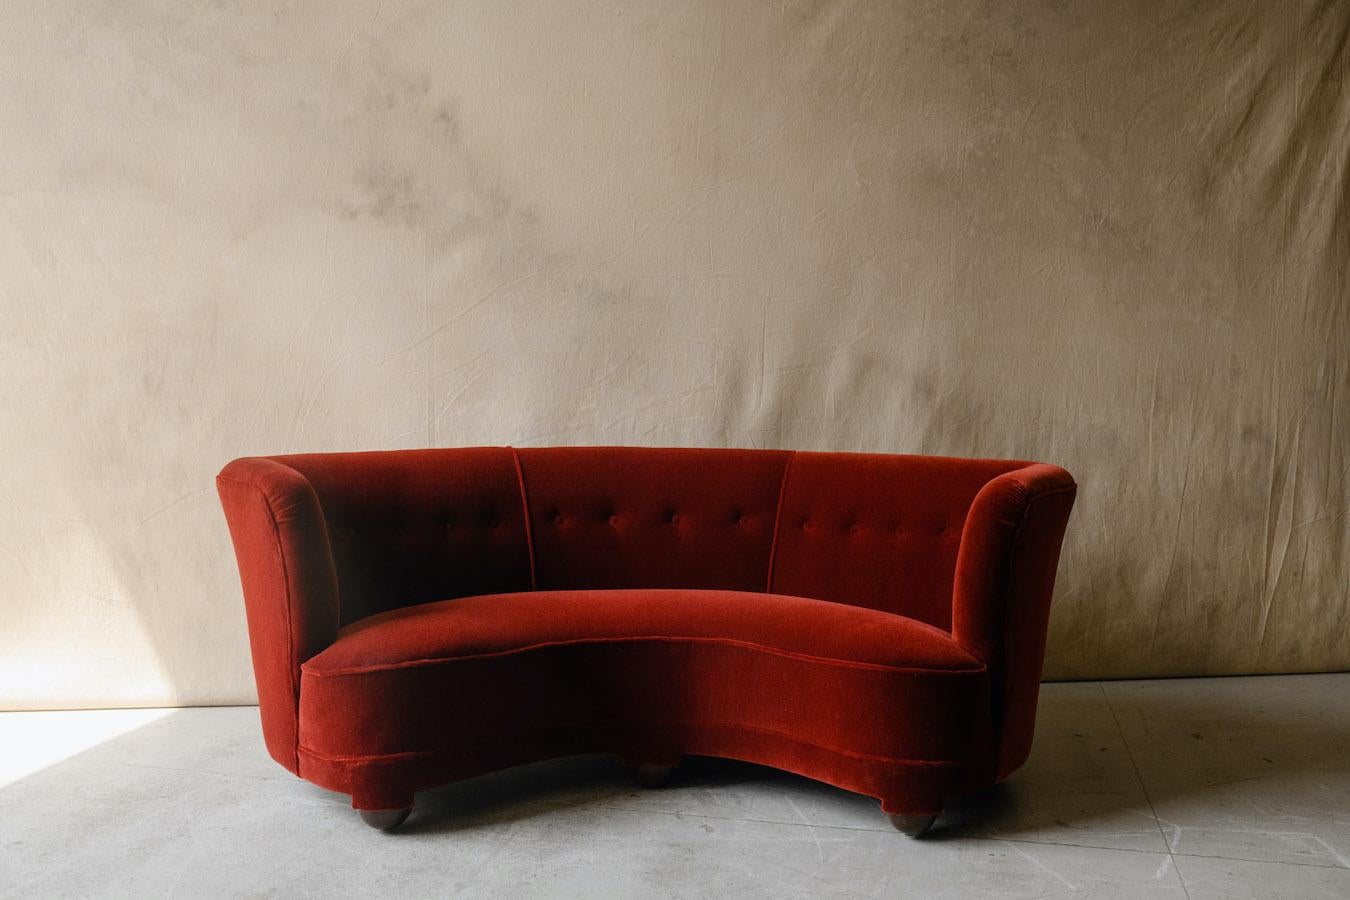 Vintage Mid Century curved sofa in mohair velvet from Denmark, Circa 1950. Superb Danish cabinetmaker sofa upholstered in a deep red velvet mohair fabric. Excellent condition with very light use. 

We don't have the time to write an extensive